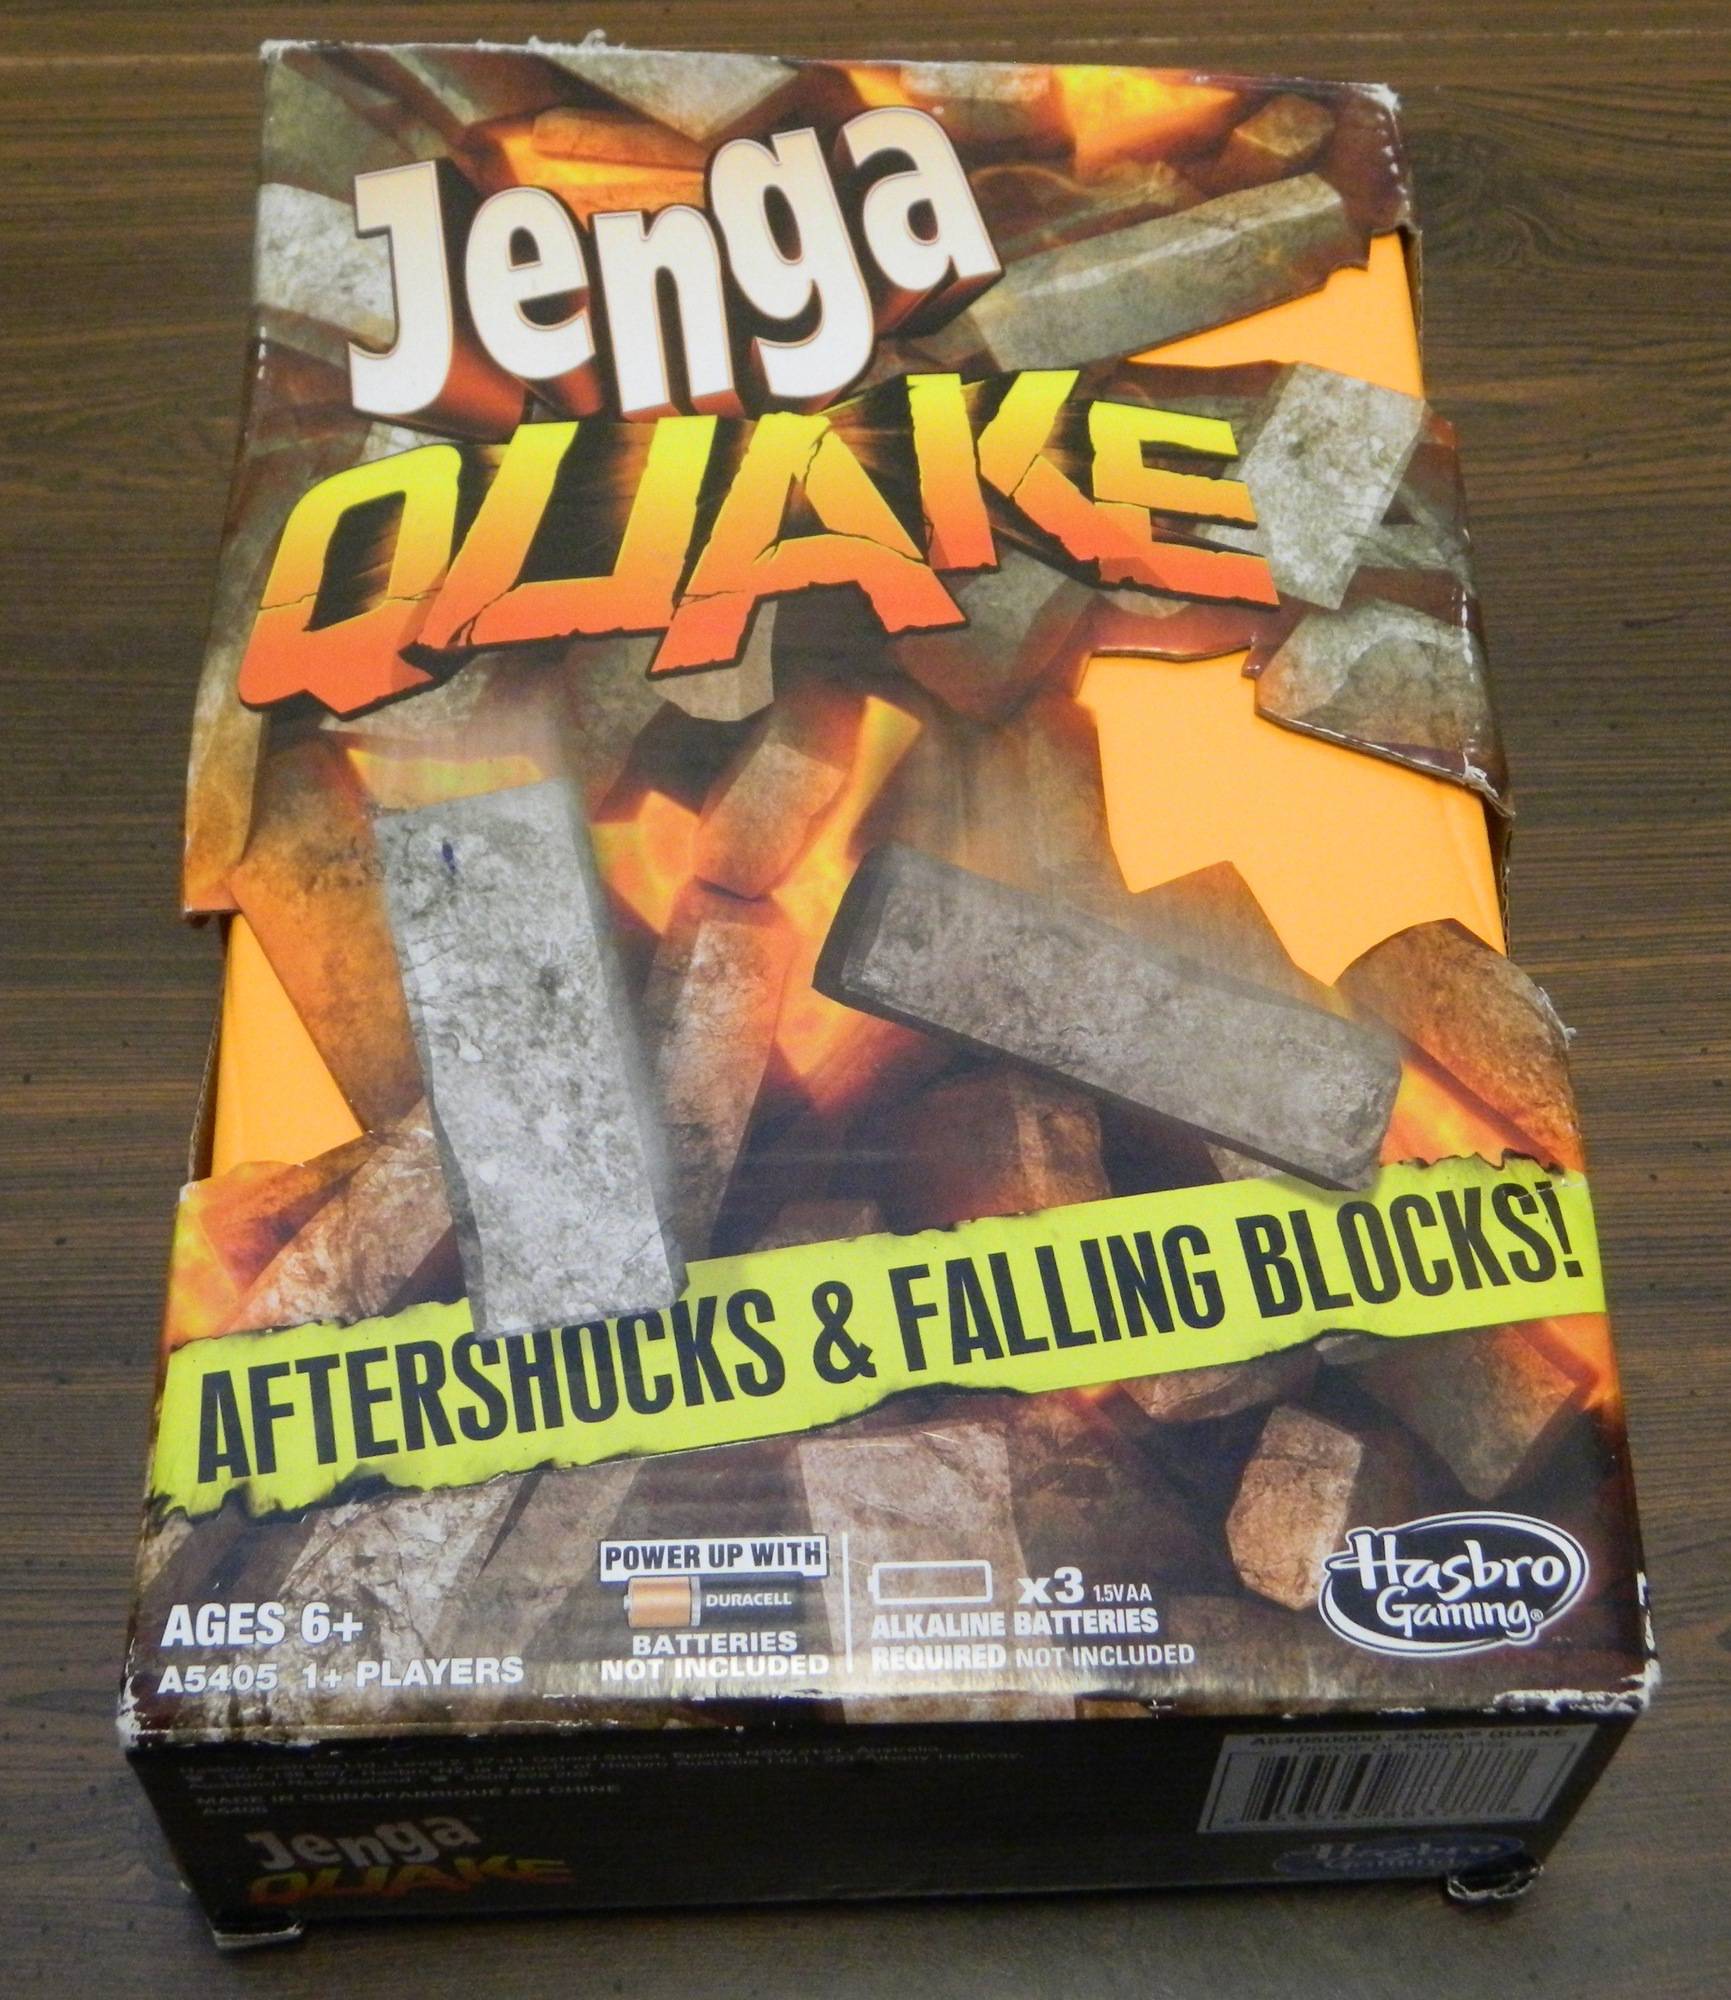 Jenga Quake Board Game Review and Rules